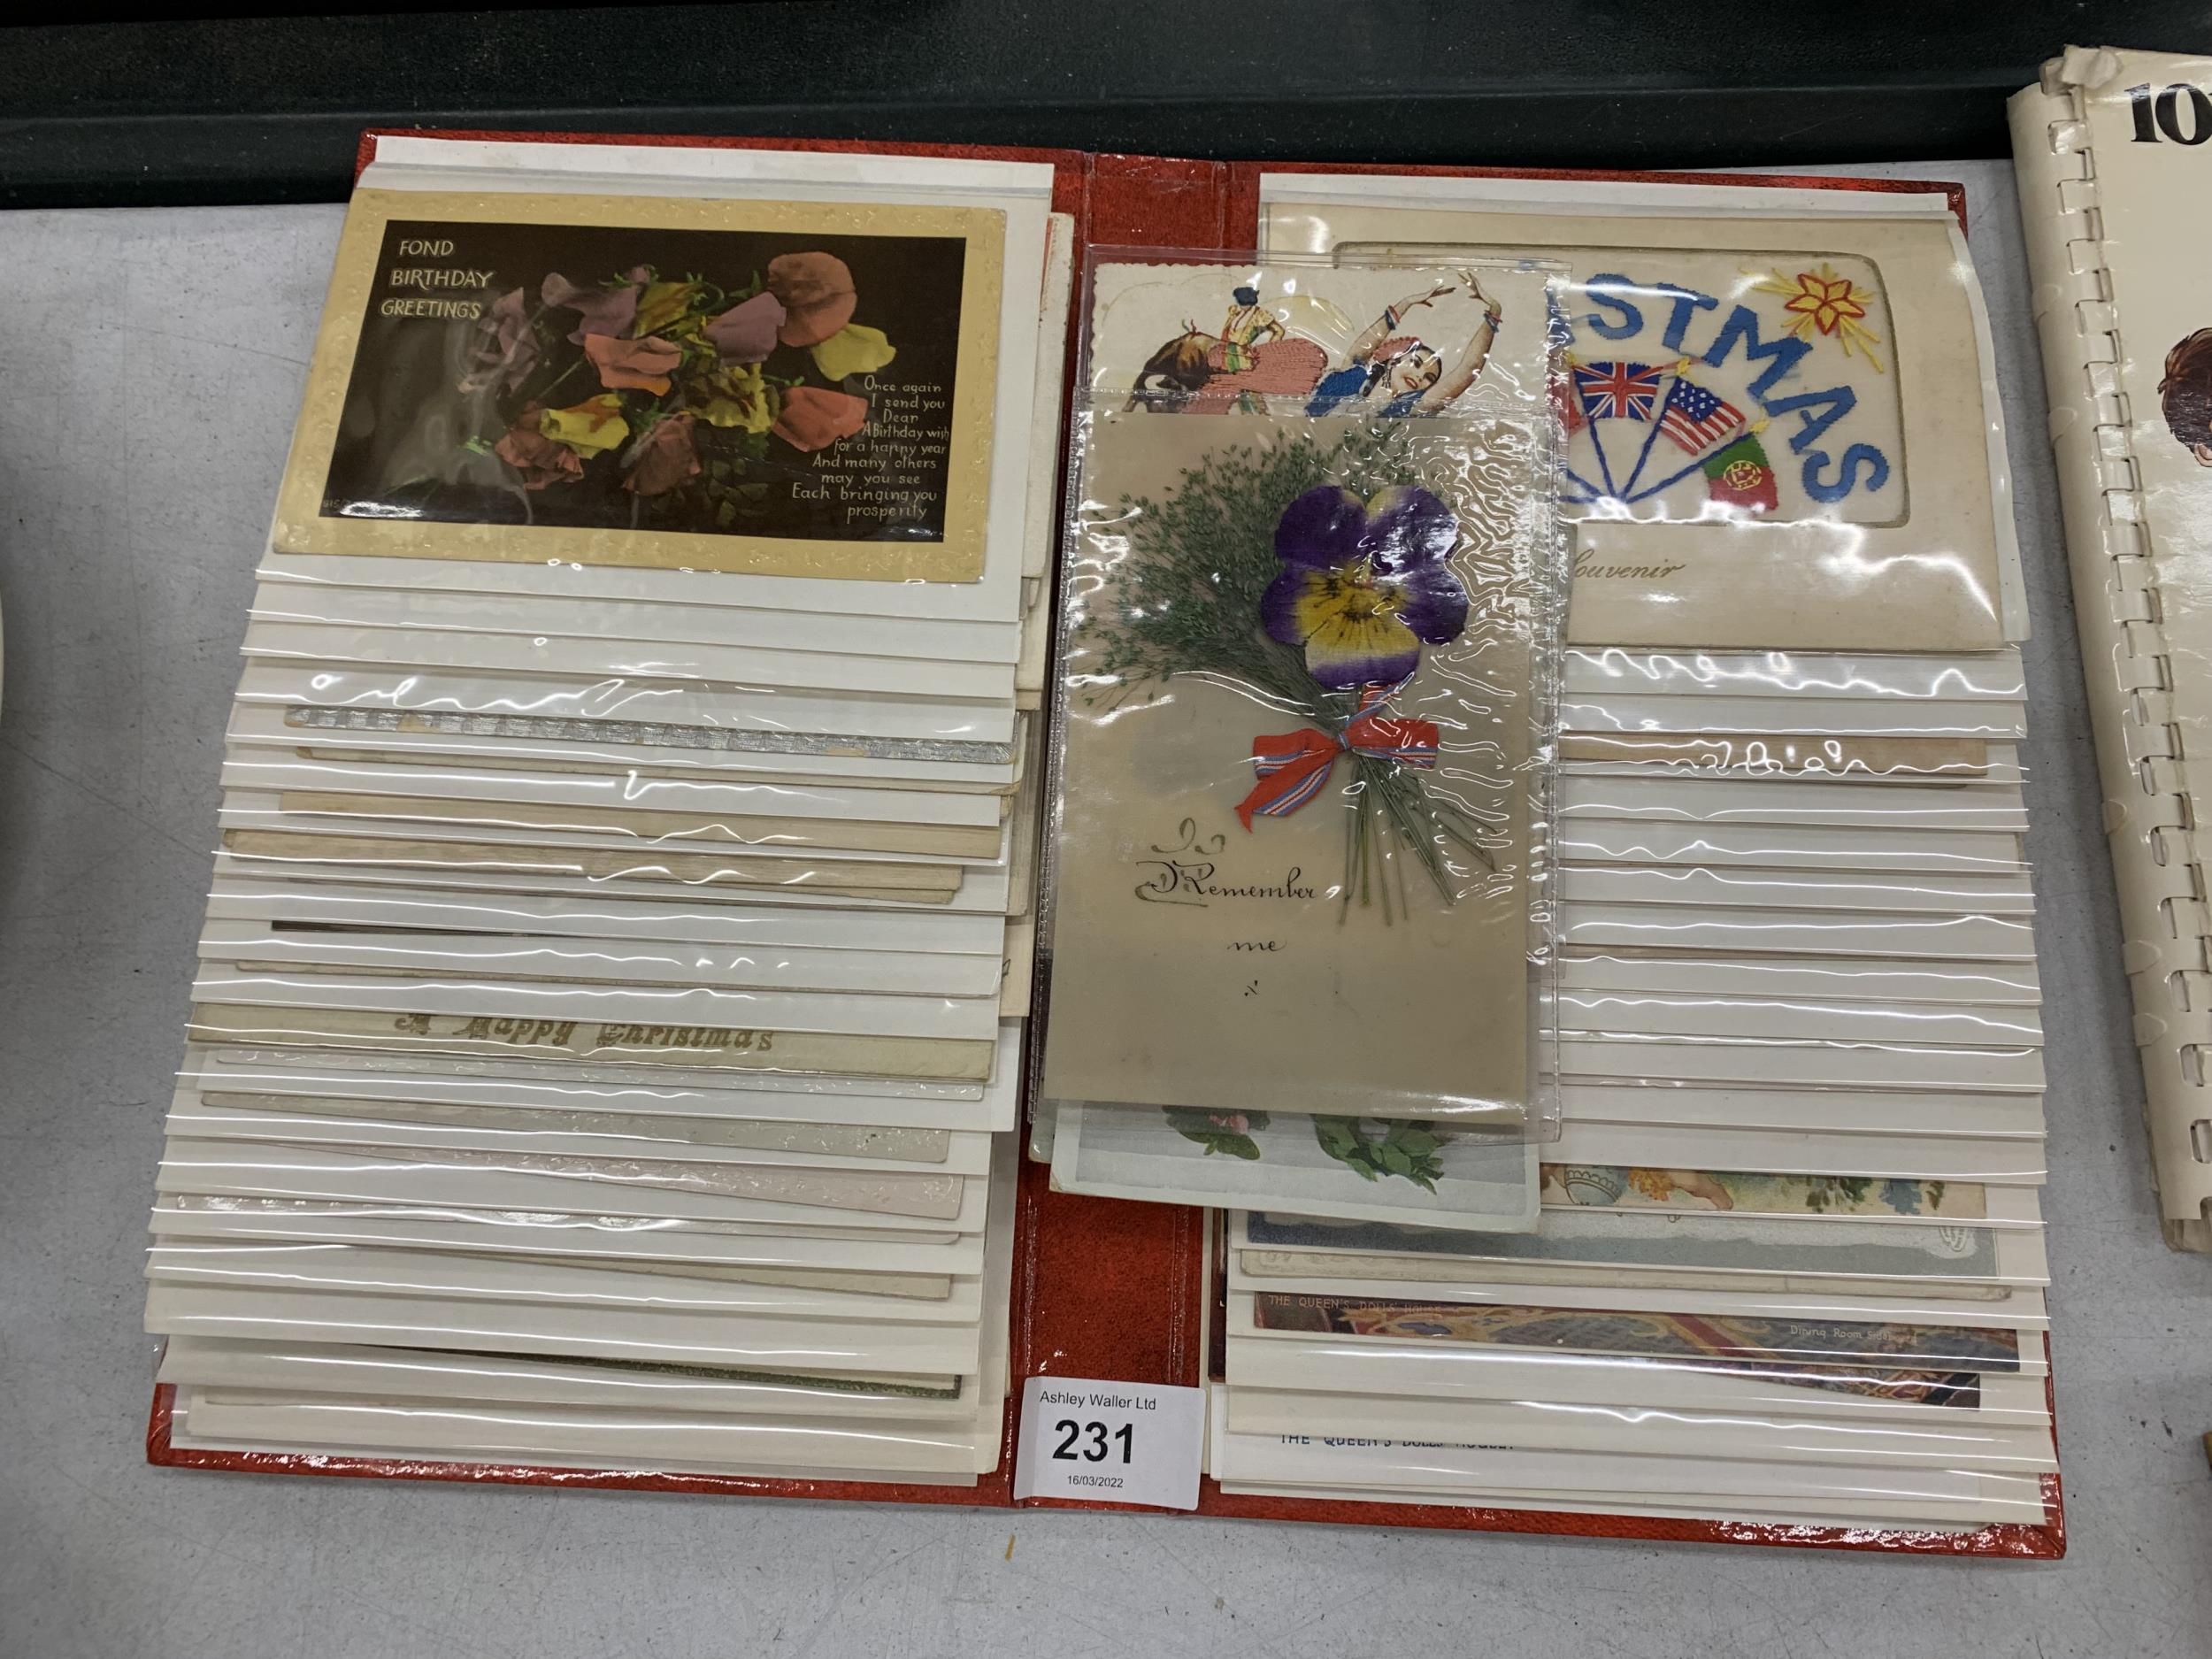 A PHOTO ALBUM CONTAINING VINTAGE POSTCARDS AND GREETINS CARDS, SOME HAND EMBROIDERED